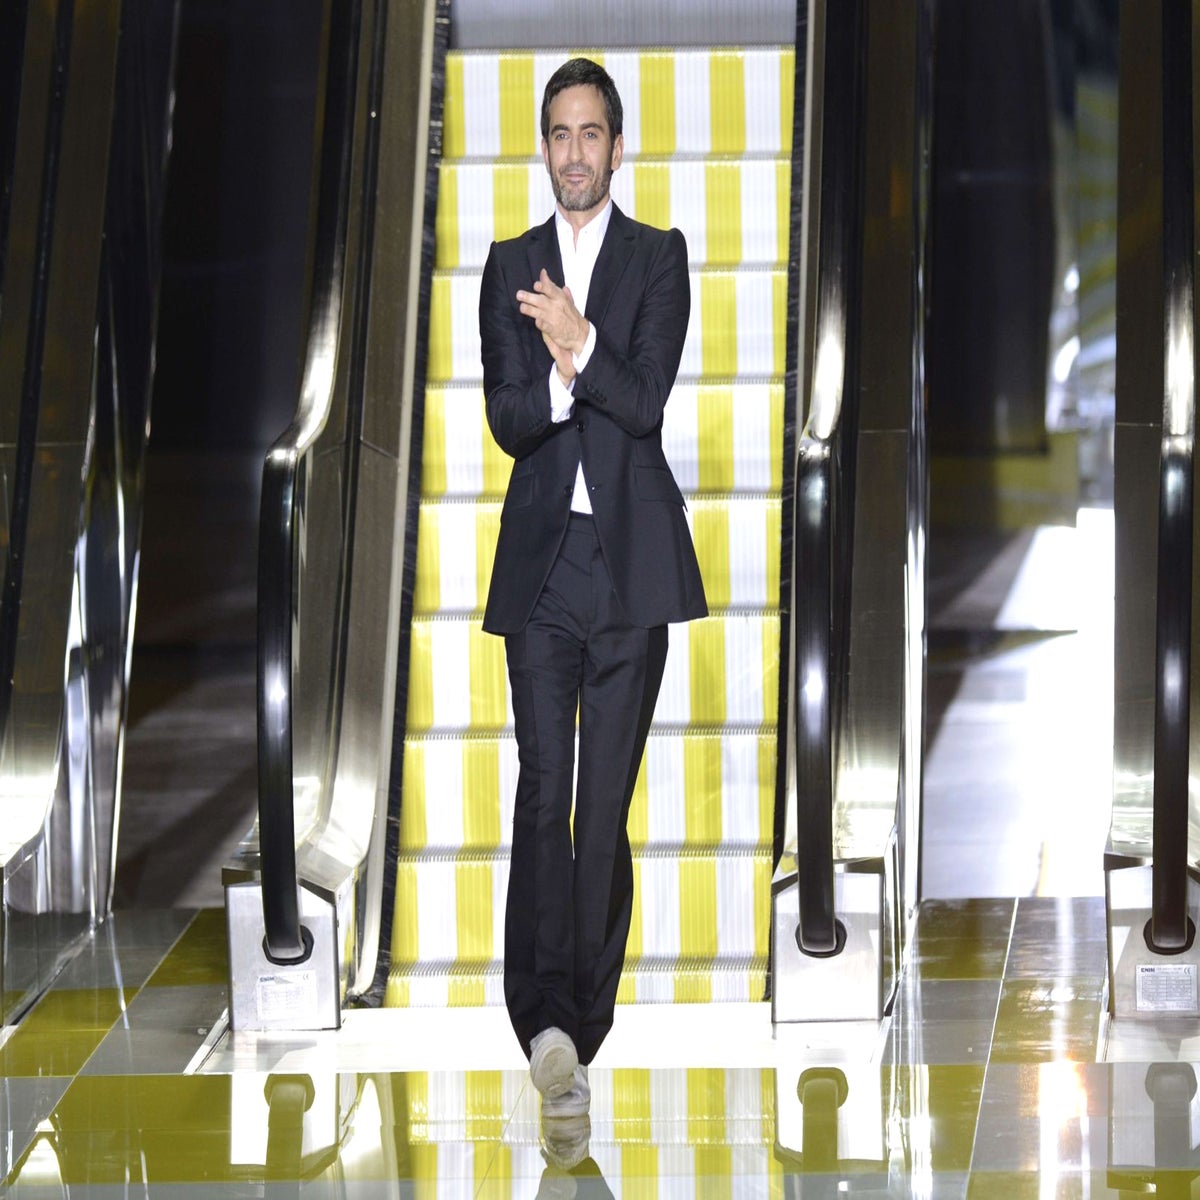 Paris Fashion Week: Marc Jacobs leaves Louis Vuitton to focus on his own  brand after emotional show, The Independent